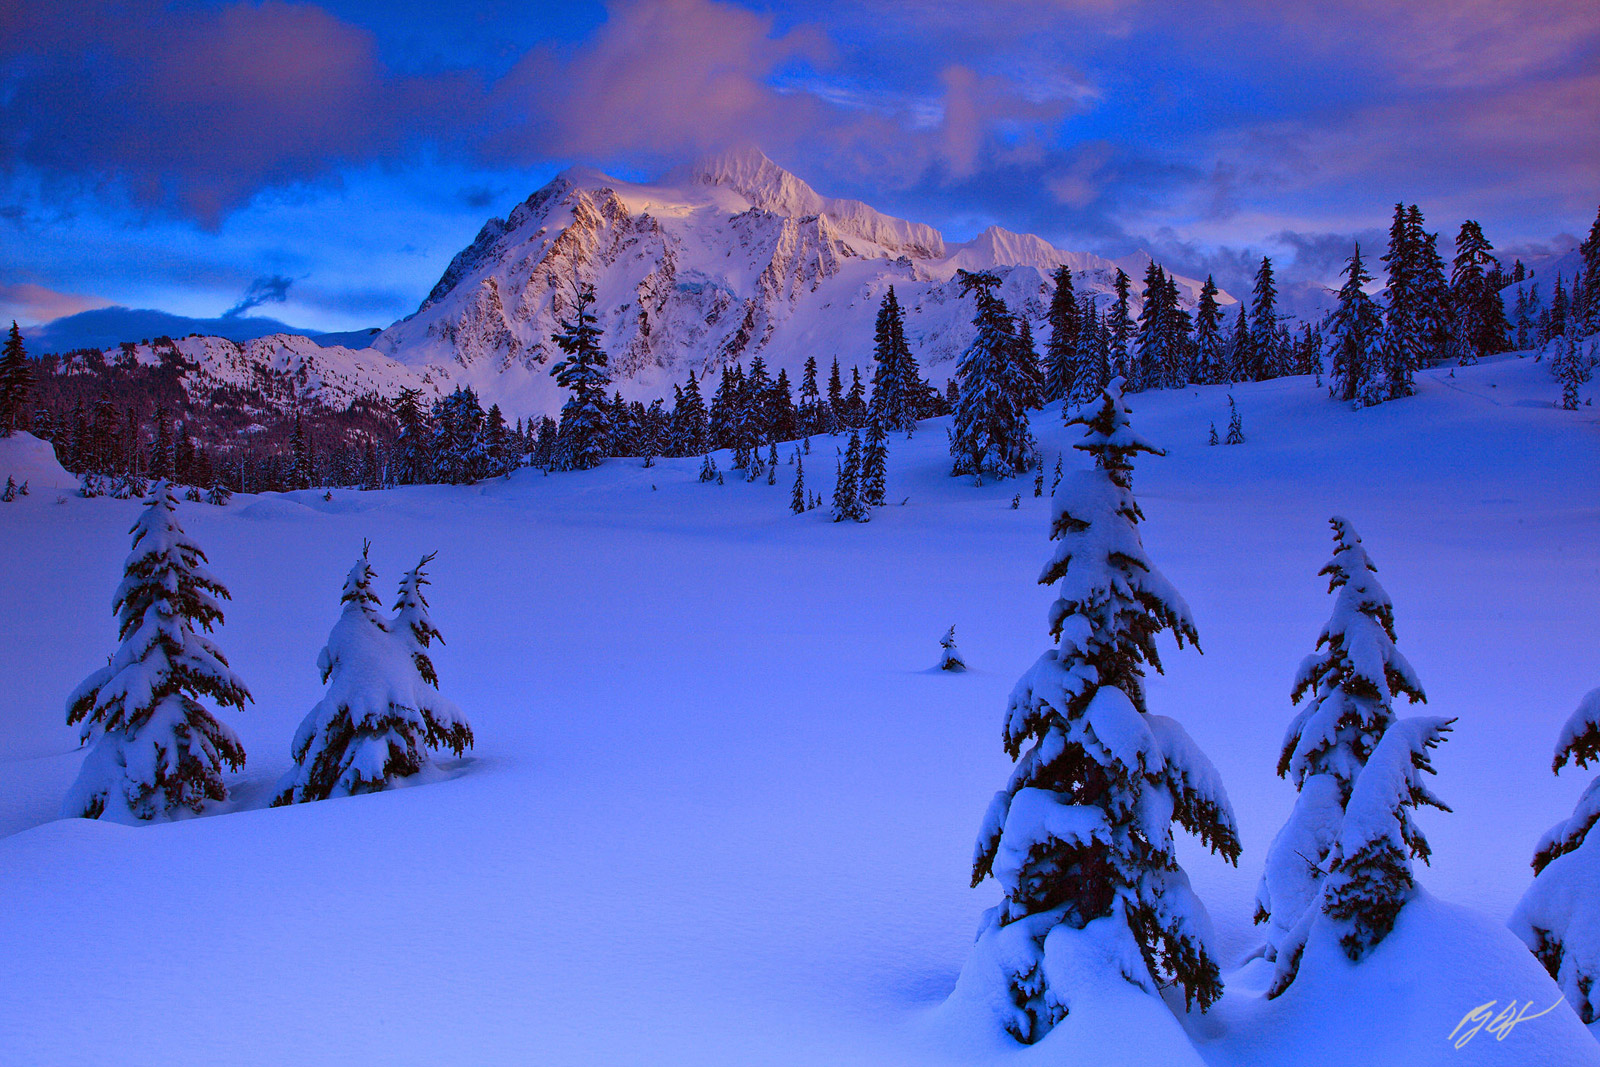 Winter Scene and Mt Shuksan from Heather Meadows in the Mt Baker National Recreation Area in Washington